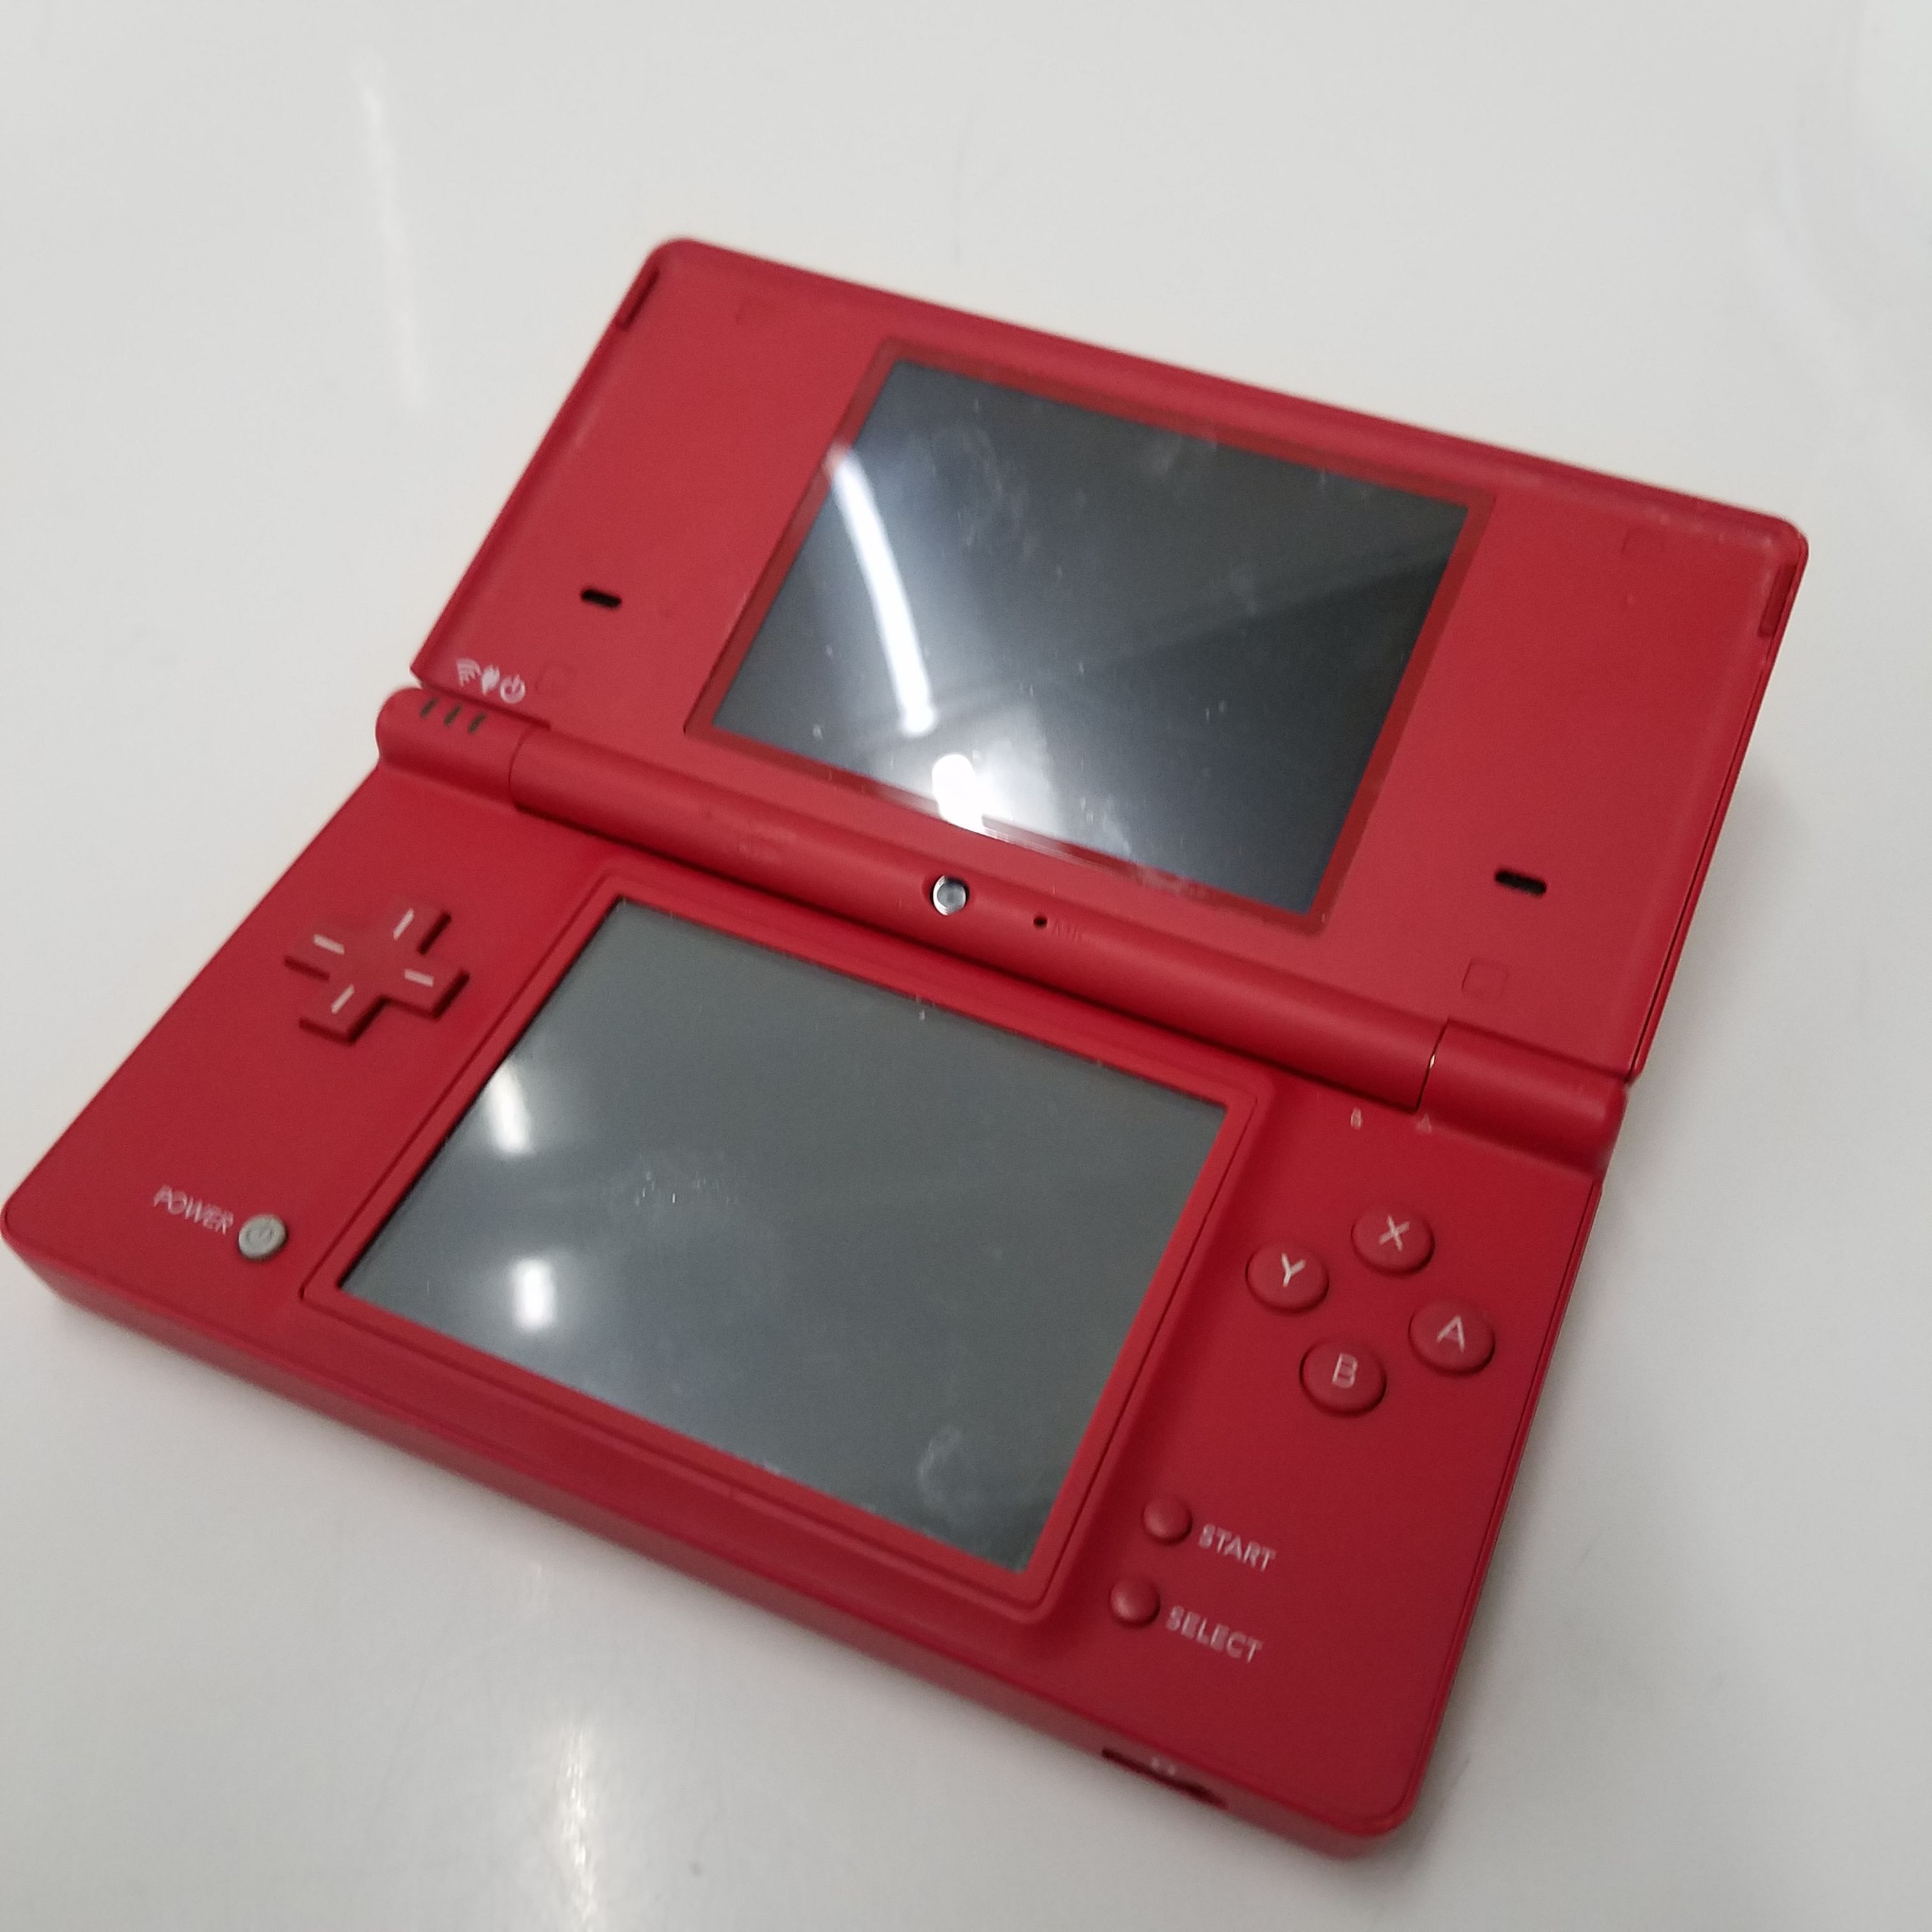 Buy the Red Nintendo DSi | GoodwillFinds